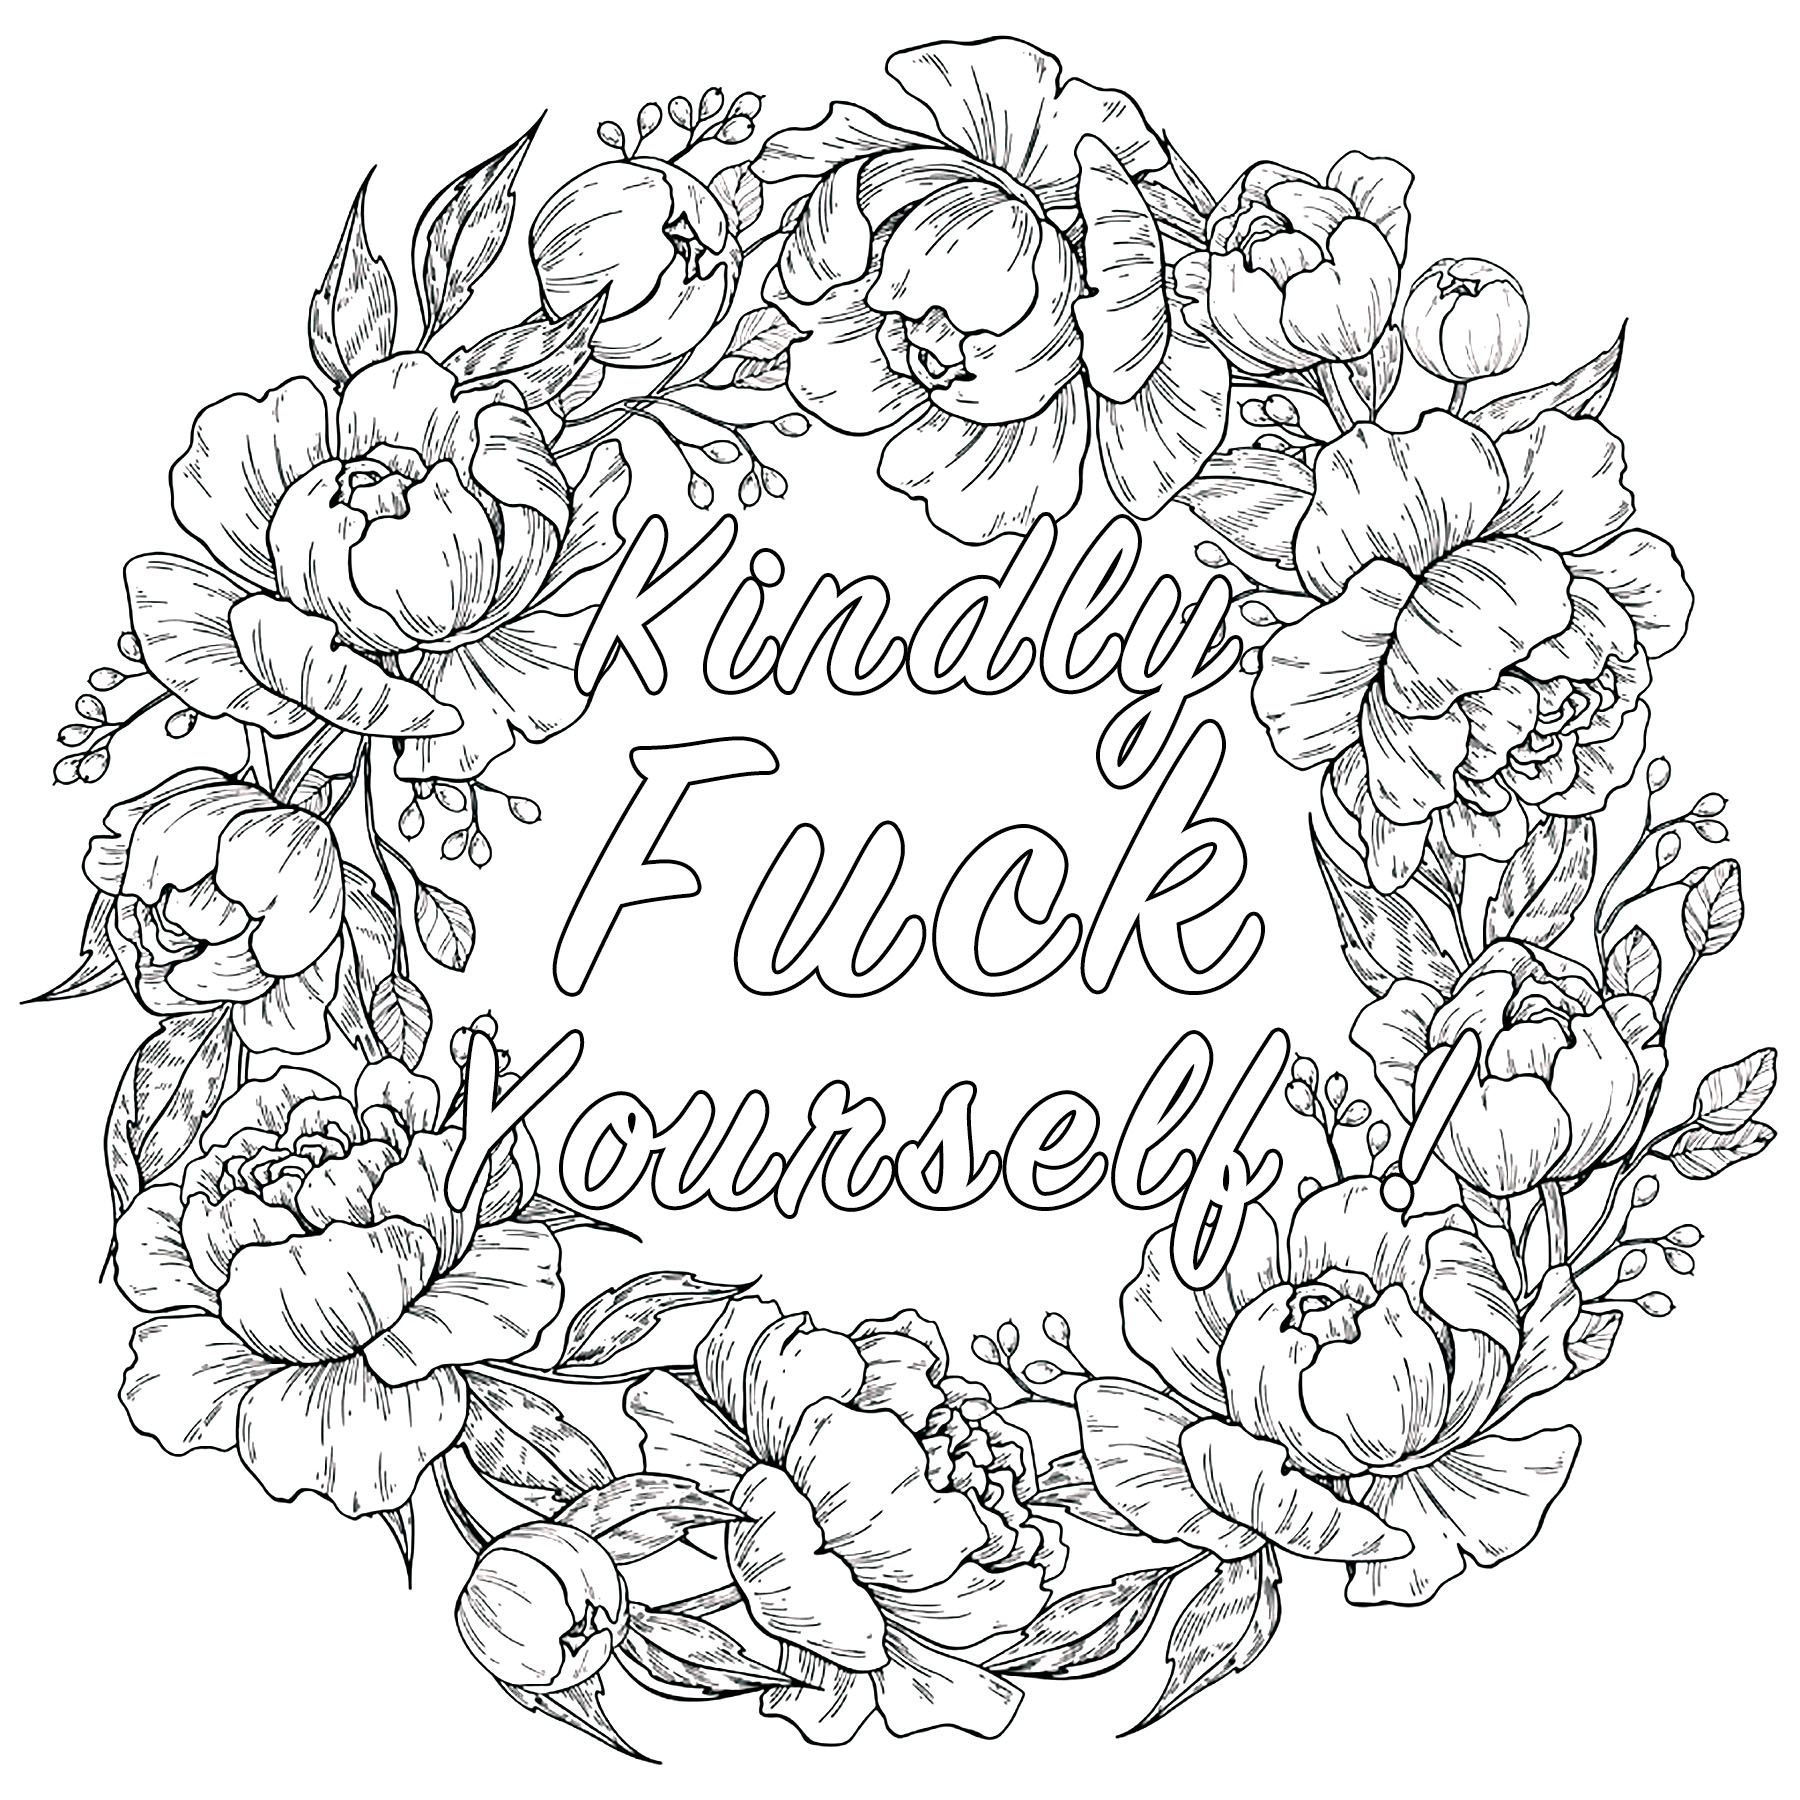 Kindly Fuck Yourself Swear Word Coloring Page Swear Word Adult Coloring Pages 